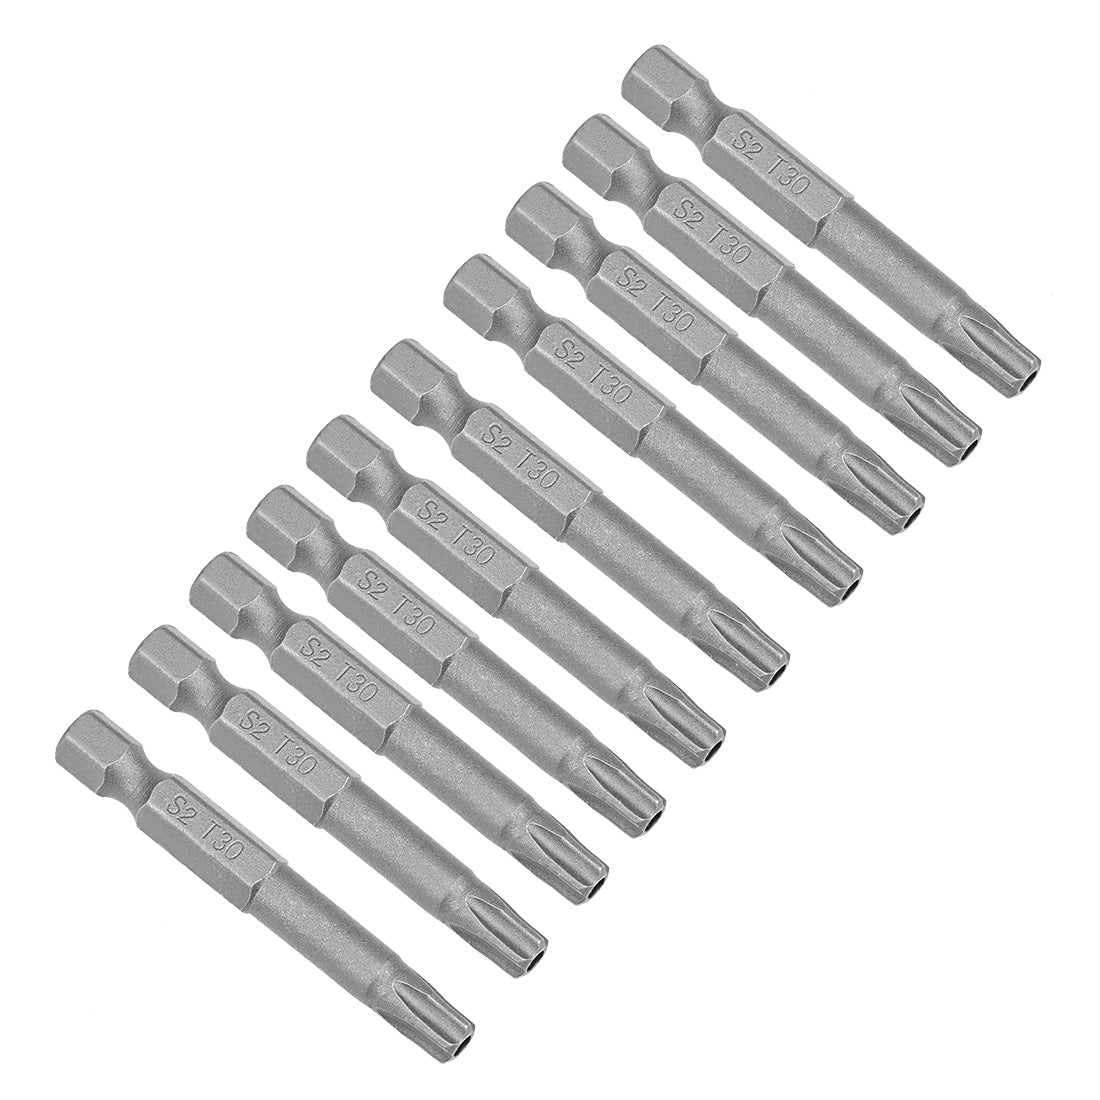 uxcell Uxcell 10 Pcs Magnetic T30 Star 5 Point Screwdriver Bits, 1/4 Inch Hex Shank 2-inch Length S2 Security Screw Driver Kit Tools